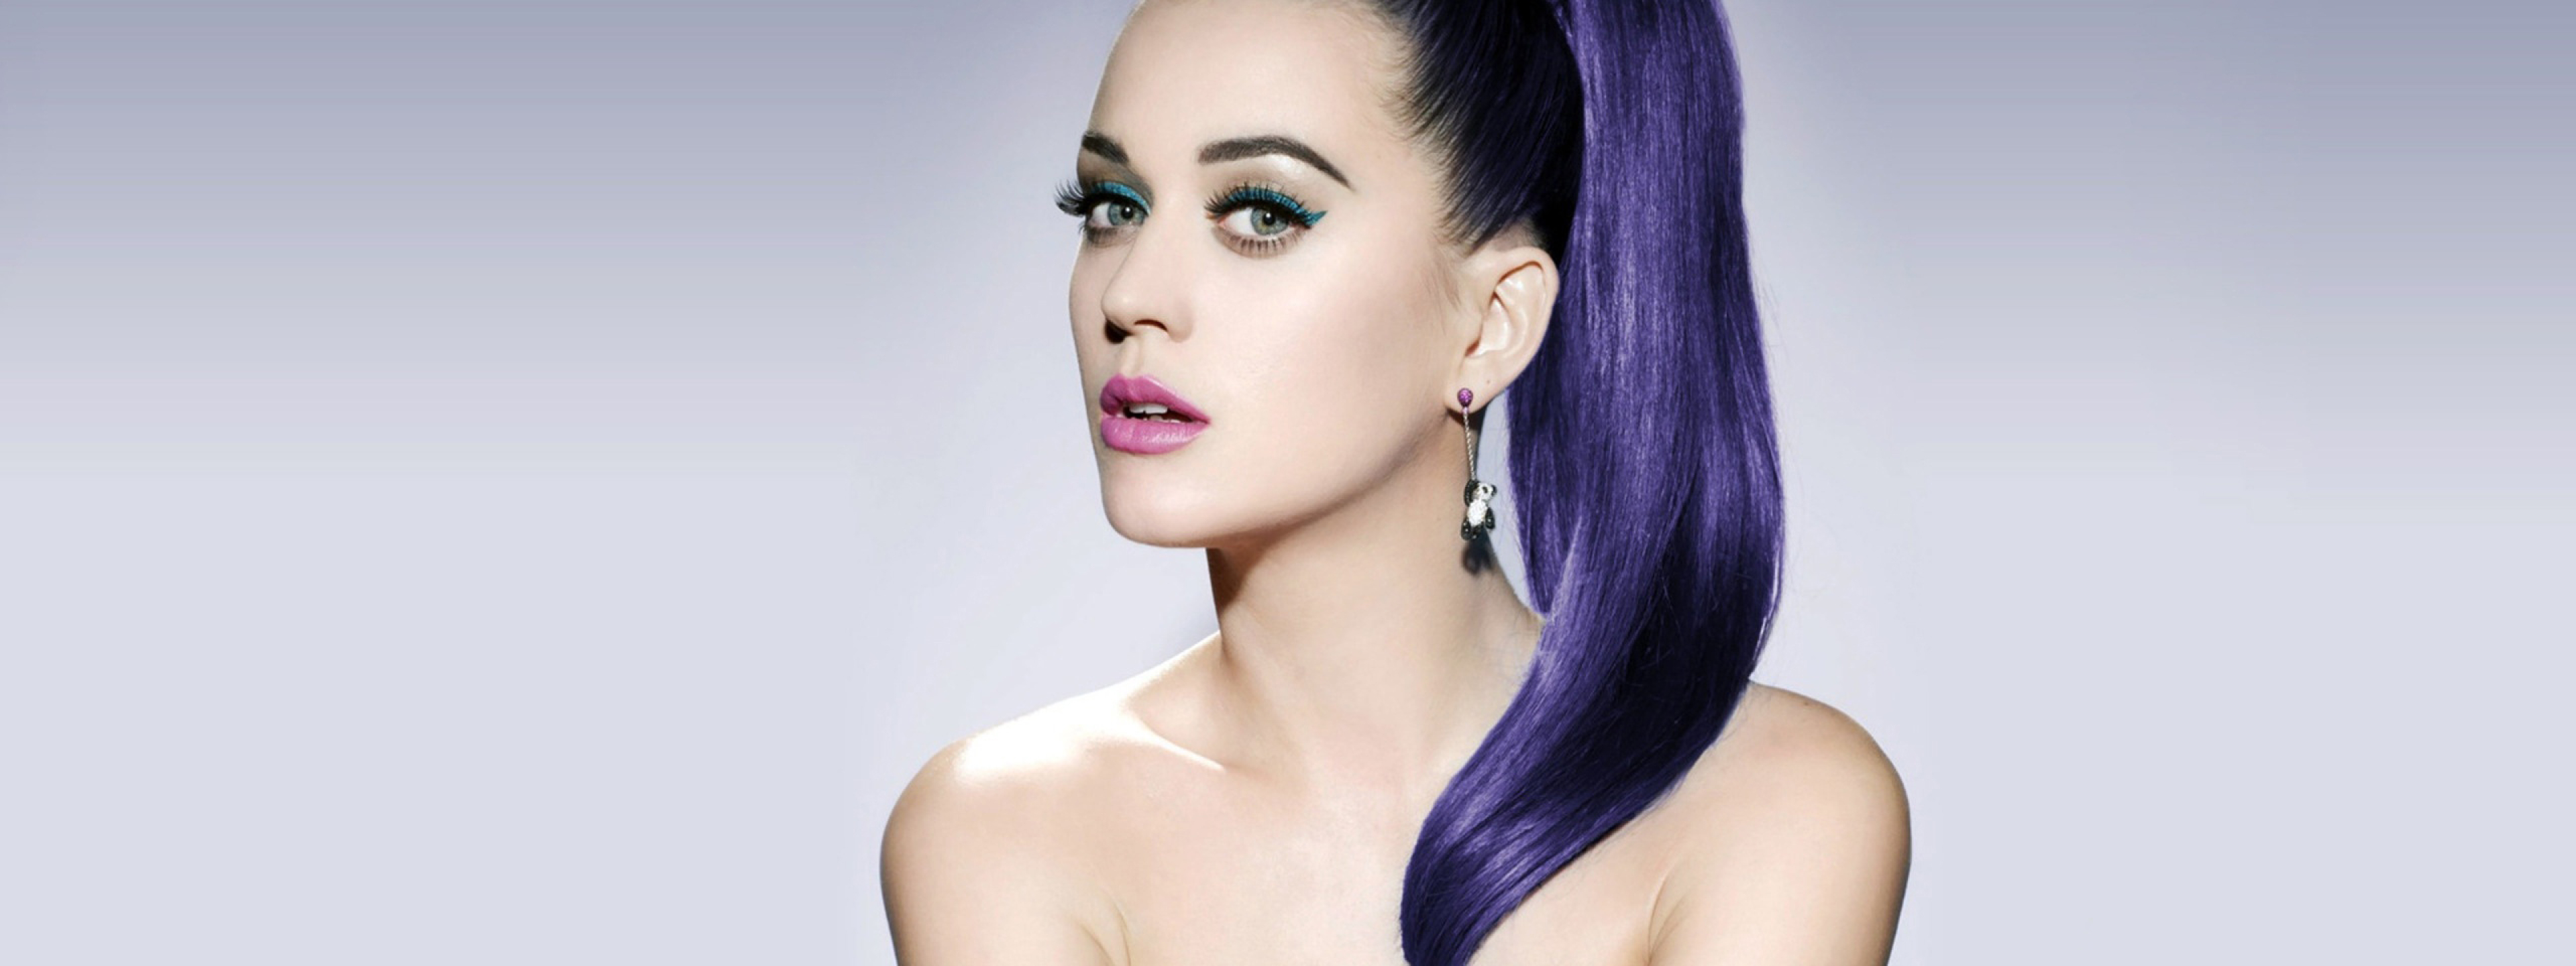 3840x1440 Resolution Katy Perry Stunning wallpapers 3840x1440 ...